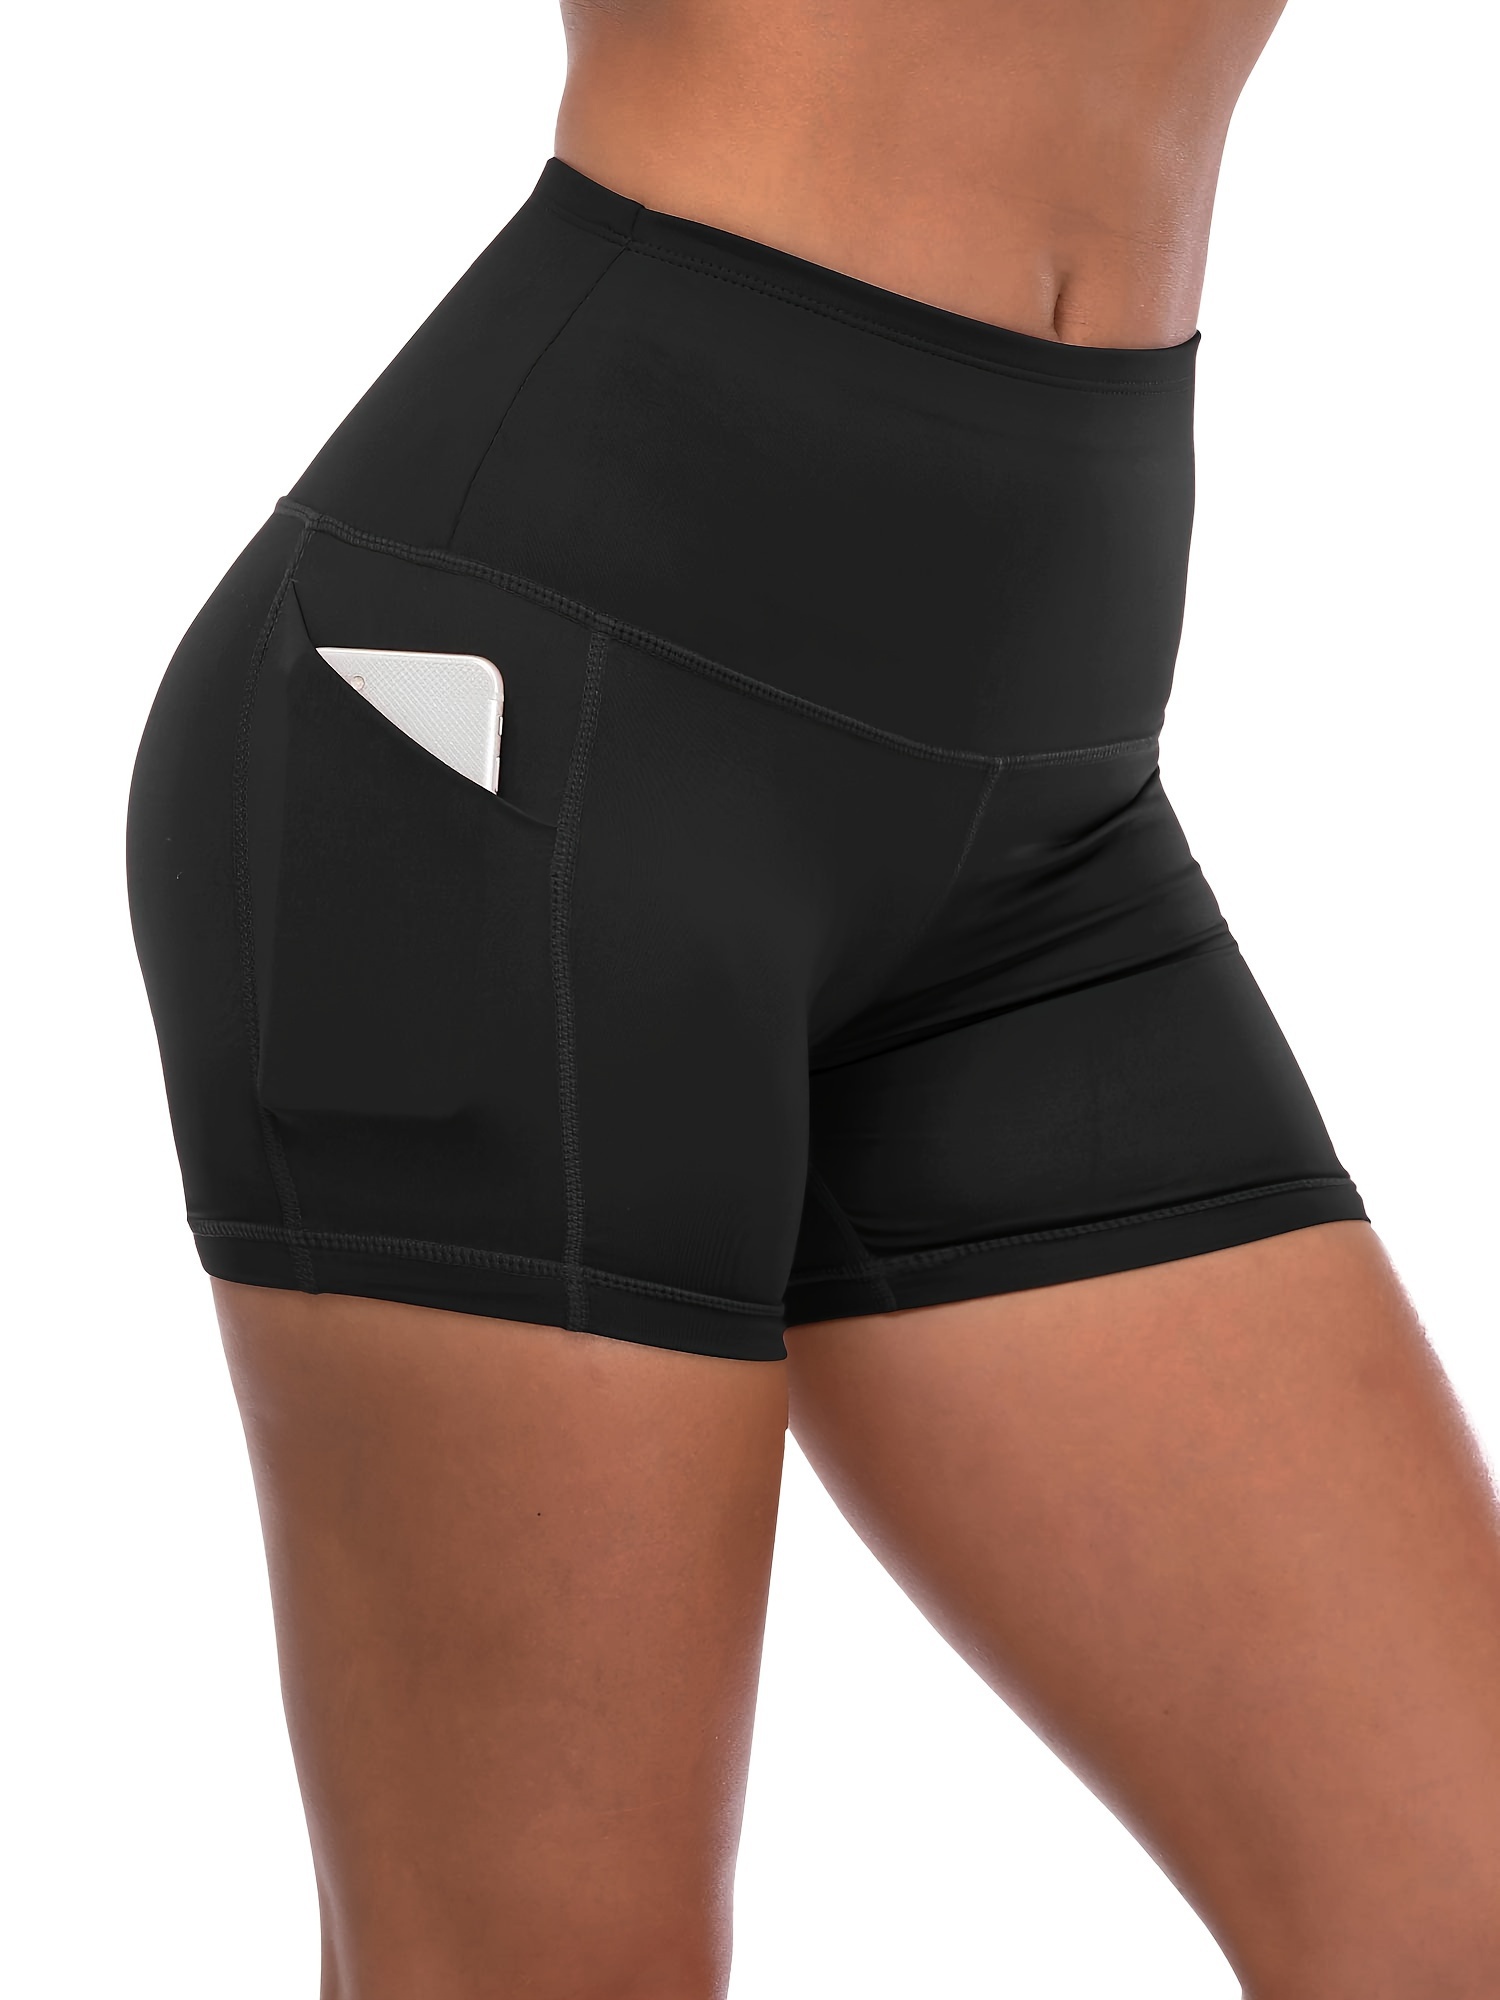 Biker's Shorts High Waisted Belly Control Short Leggings for Women Gym  People Workout Yoga Shorts With Pockets 